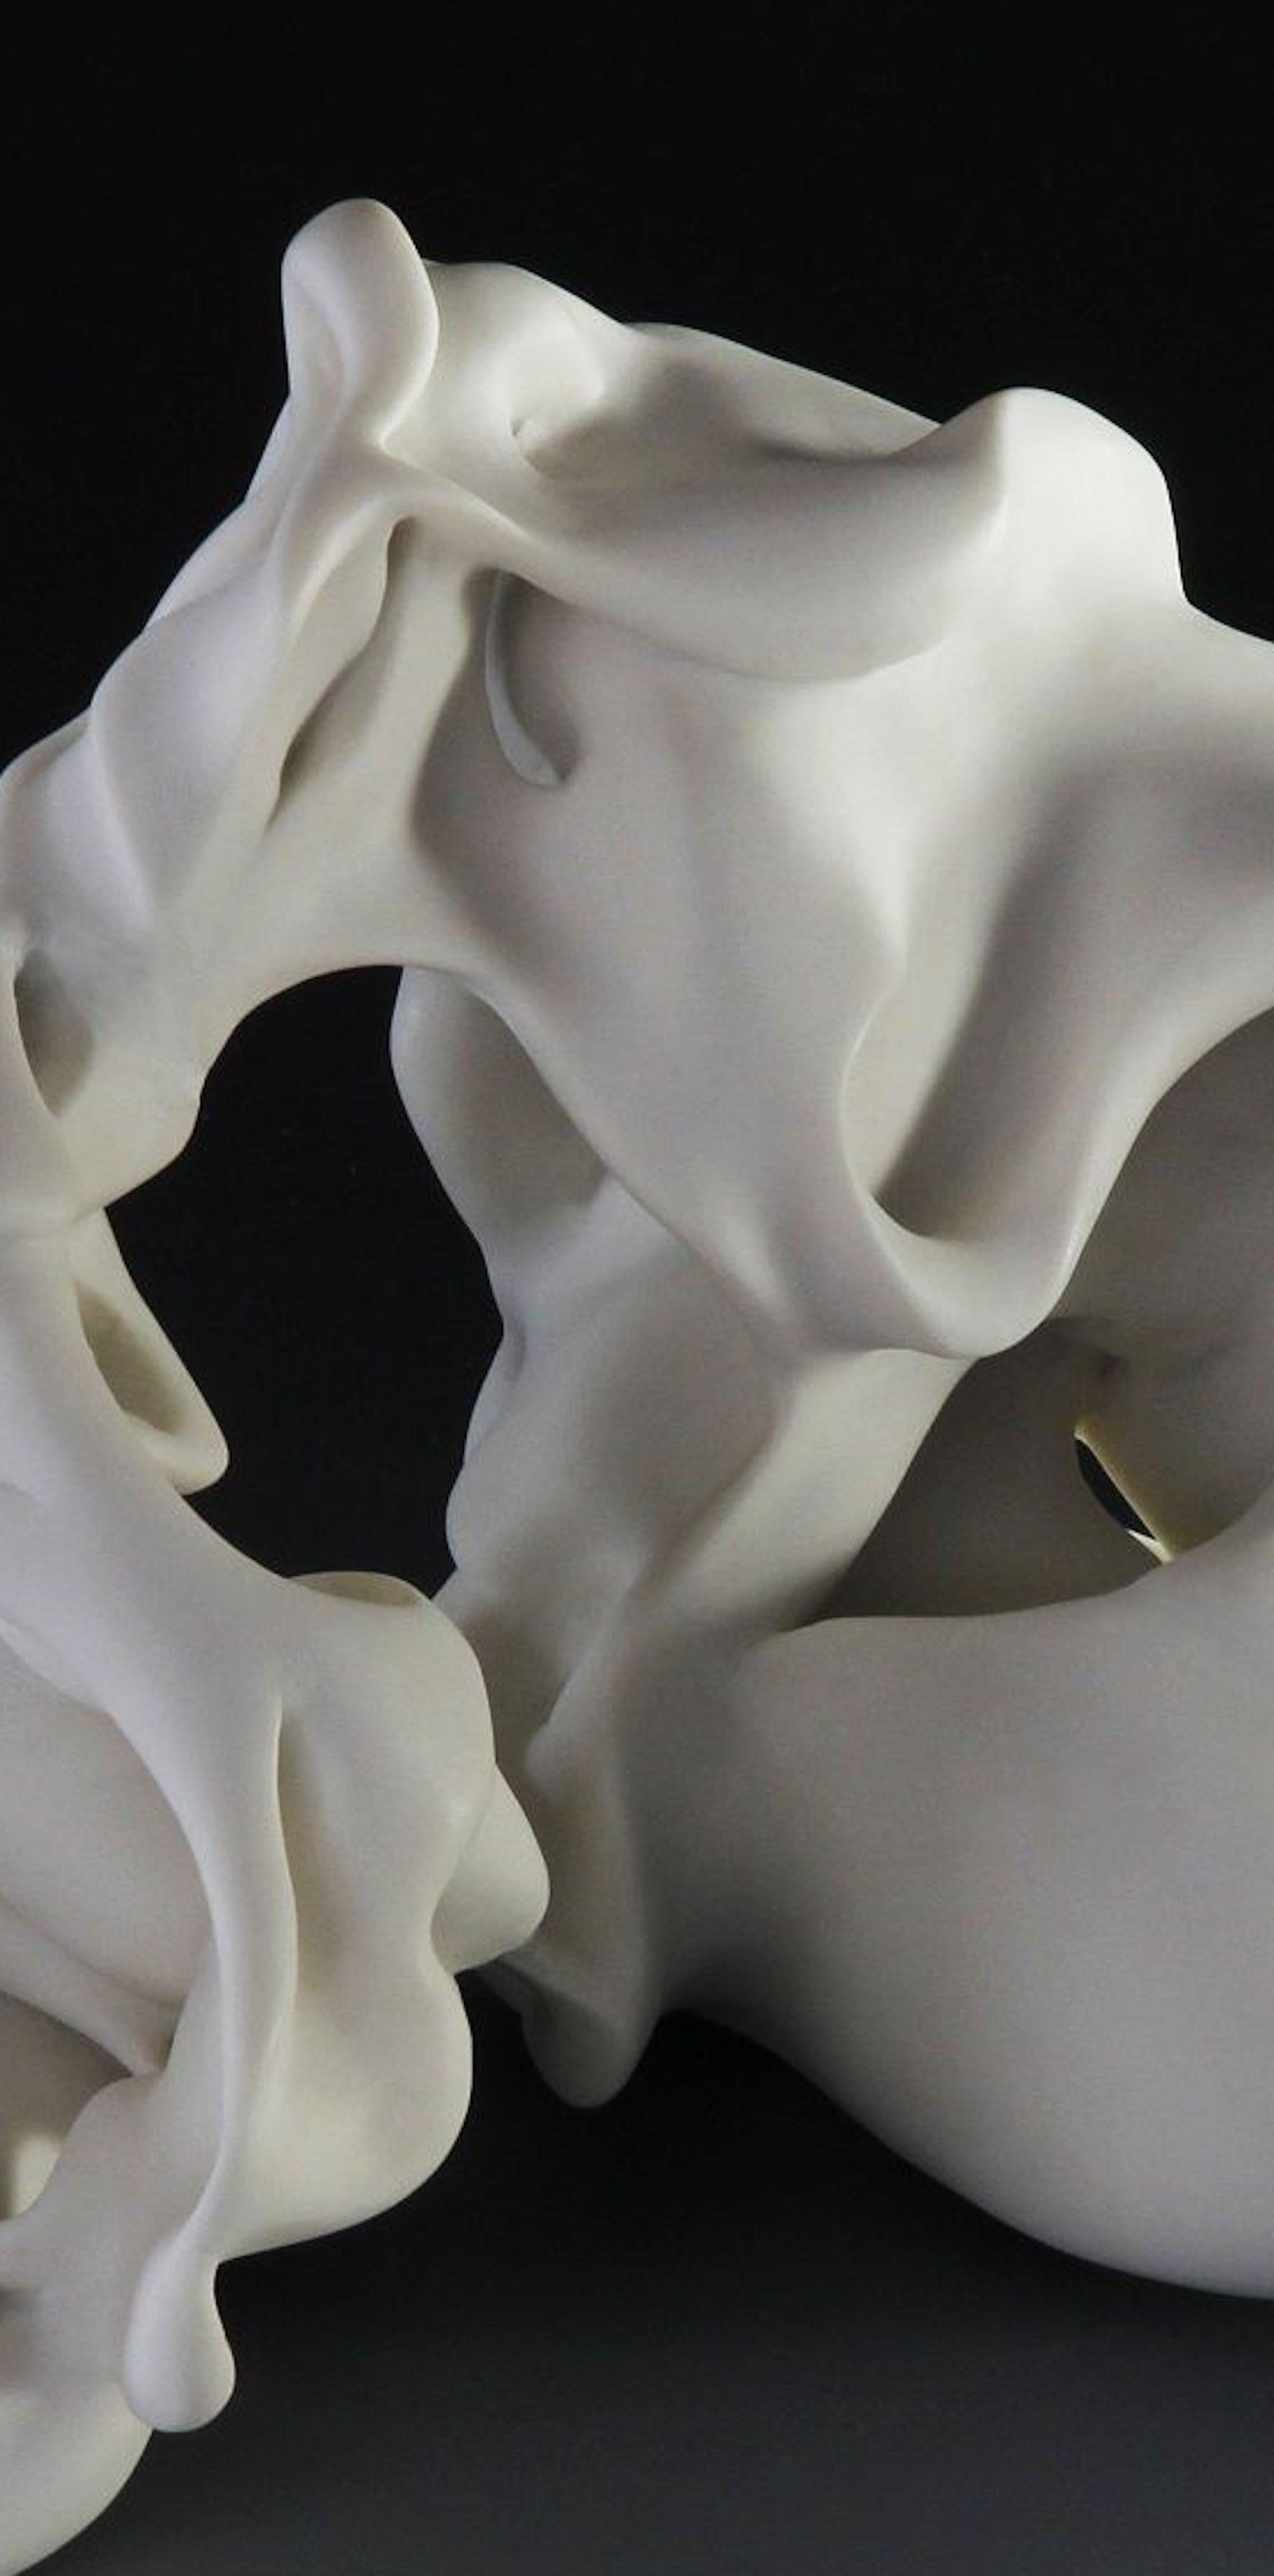 Hollows 3 by Sharon Brill - Abstract porcelain sculpture, organic forms, white For Sale 3